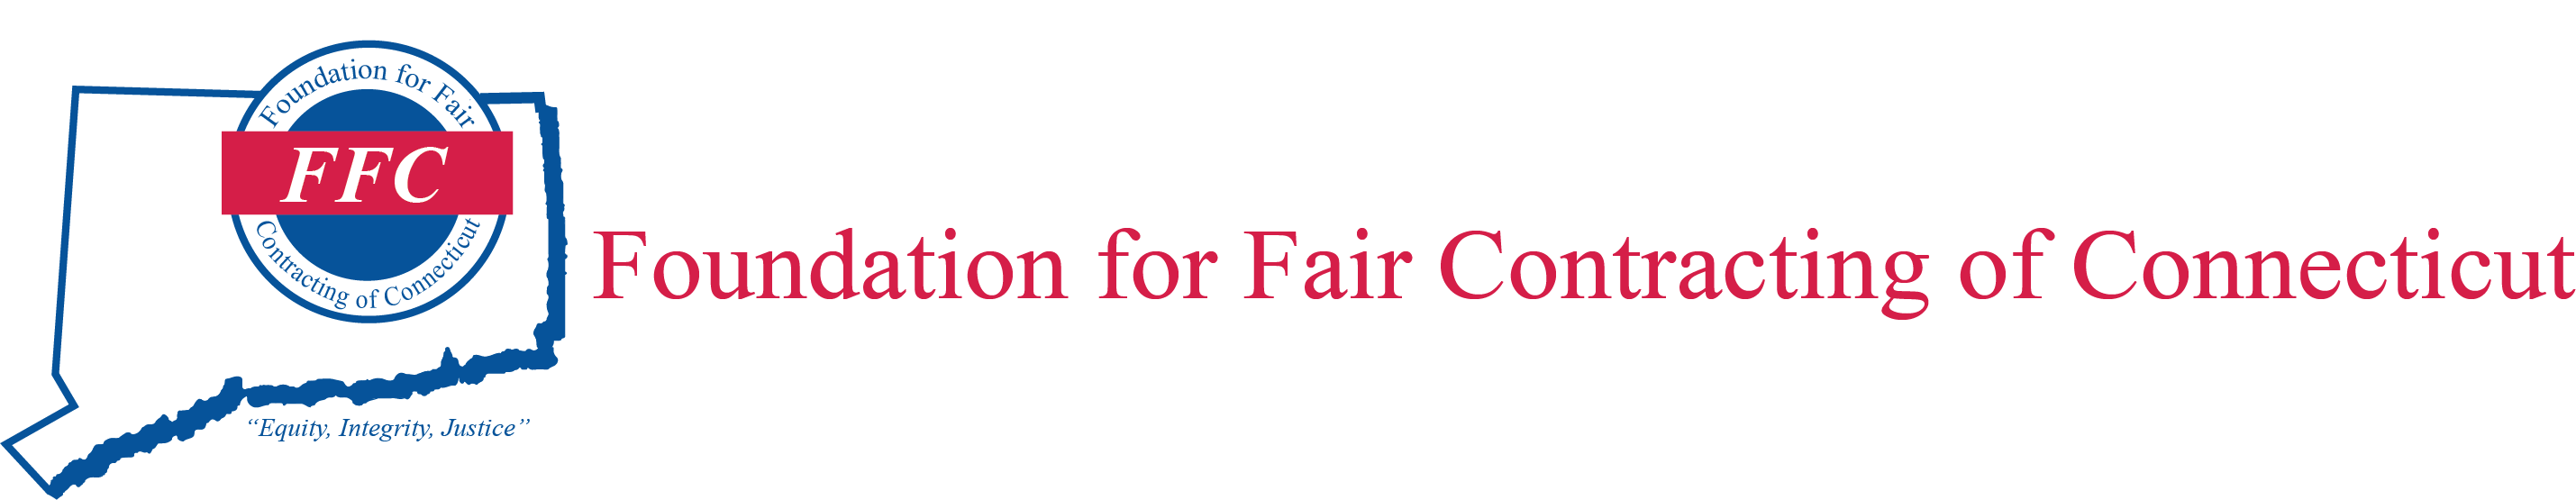 Foundation for Fair Contracting of Connecticut, Inc.